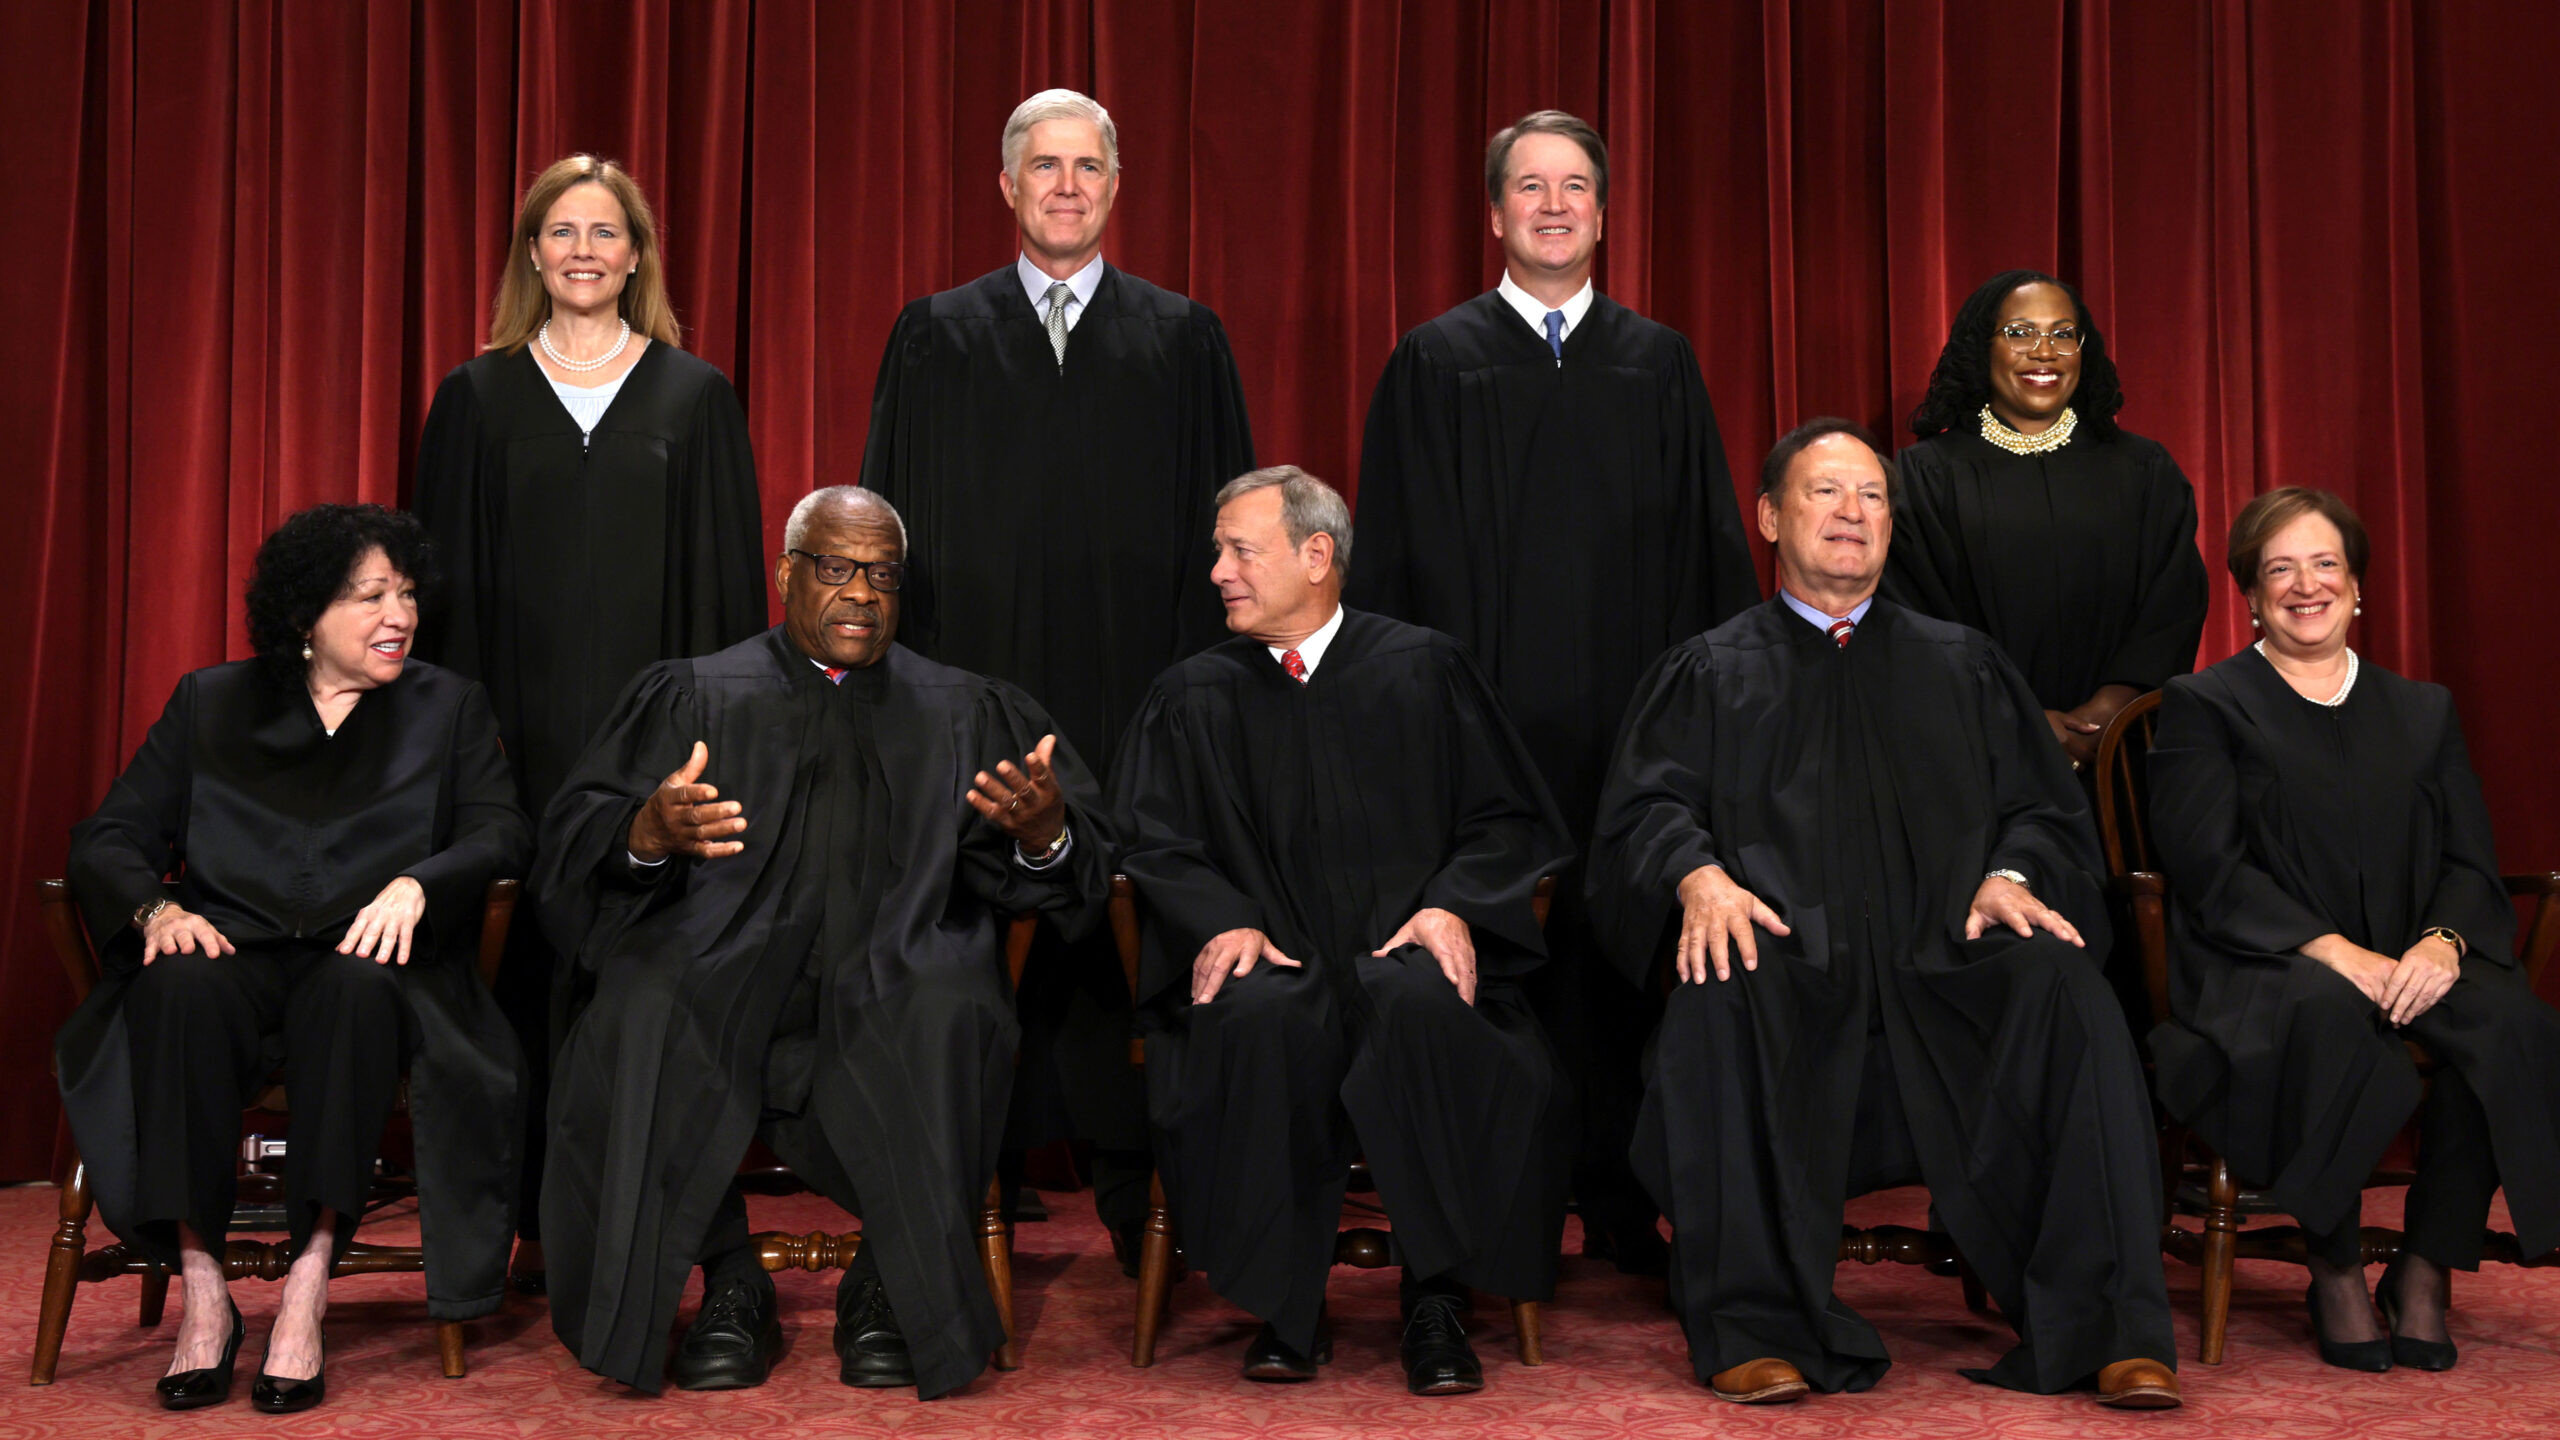 All 9 Supreme Court Justices Issue Rare Statement After Leftist Attacks On Conservative Justices